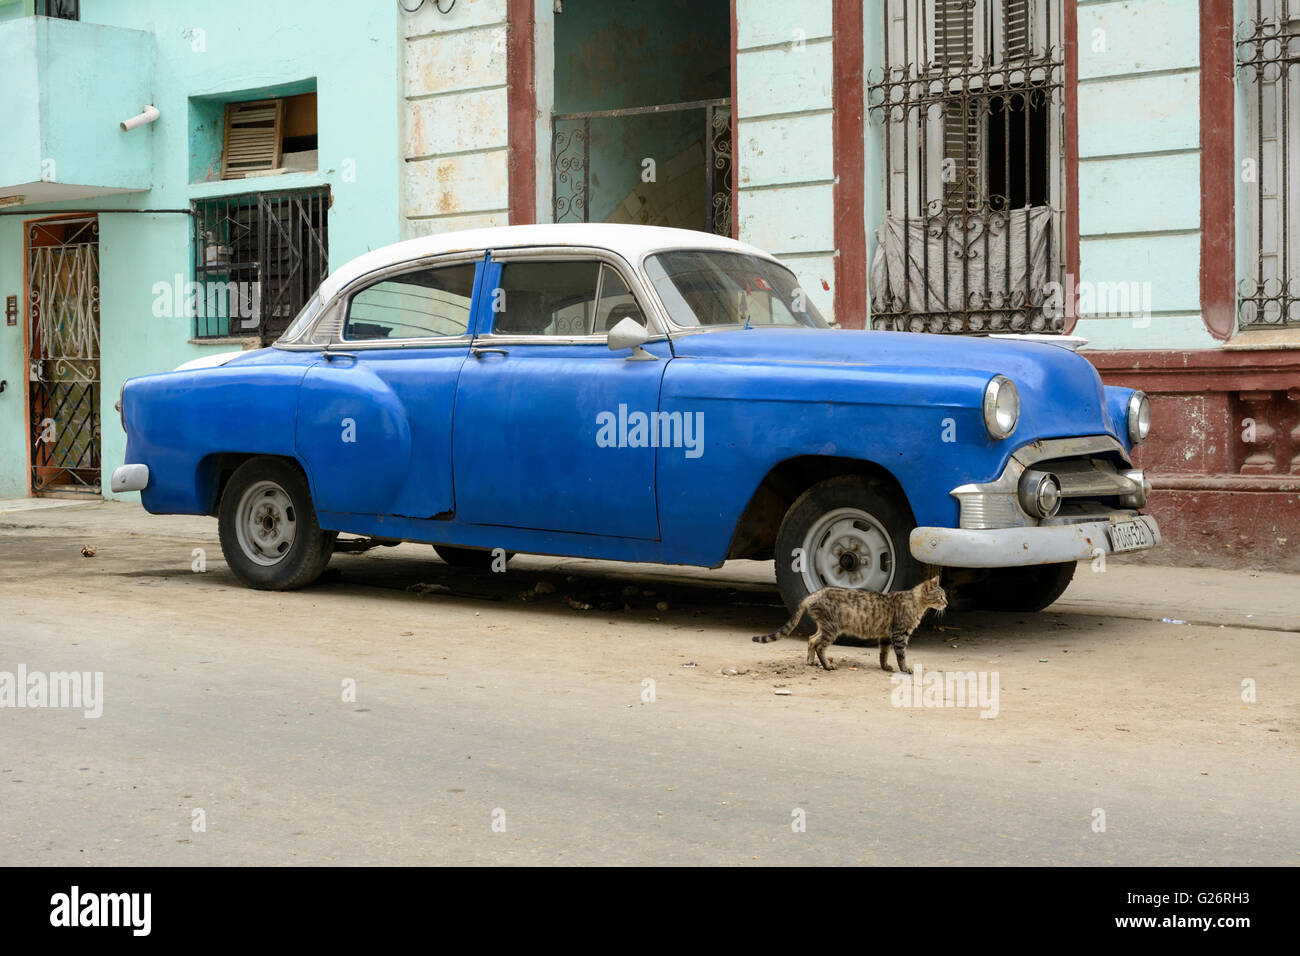 Vintage American car (Chevrolet) and a cat in Havana, Cuba Stock Photo